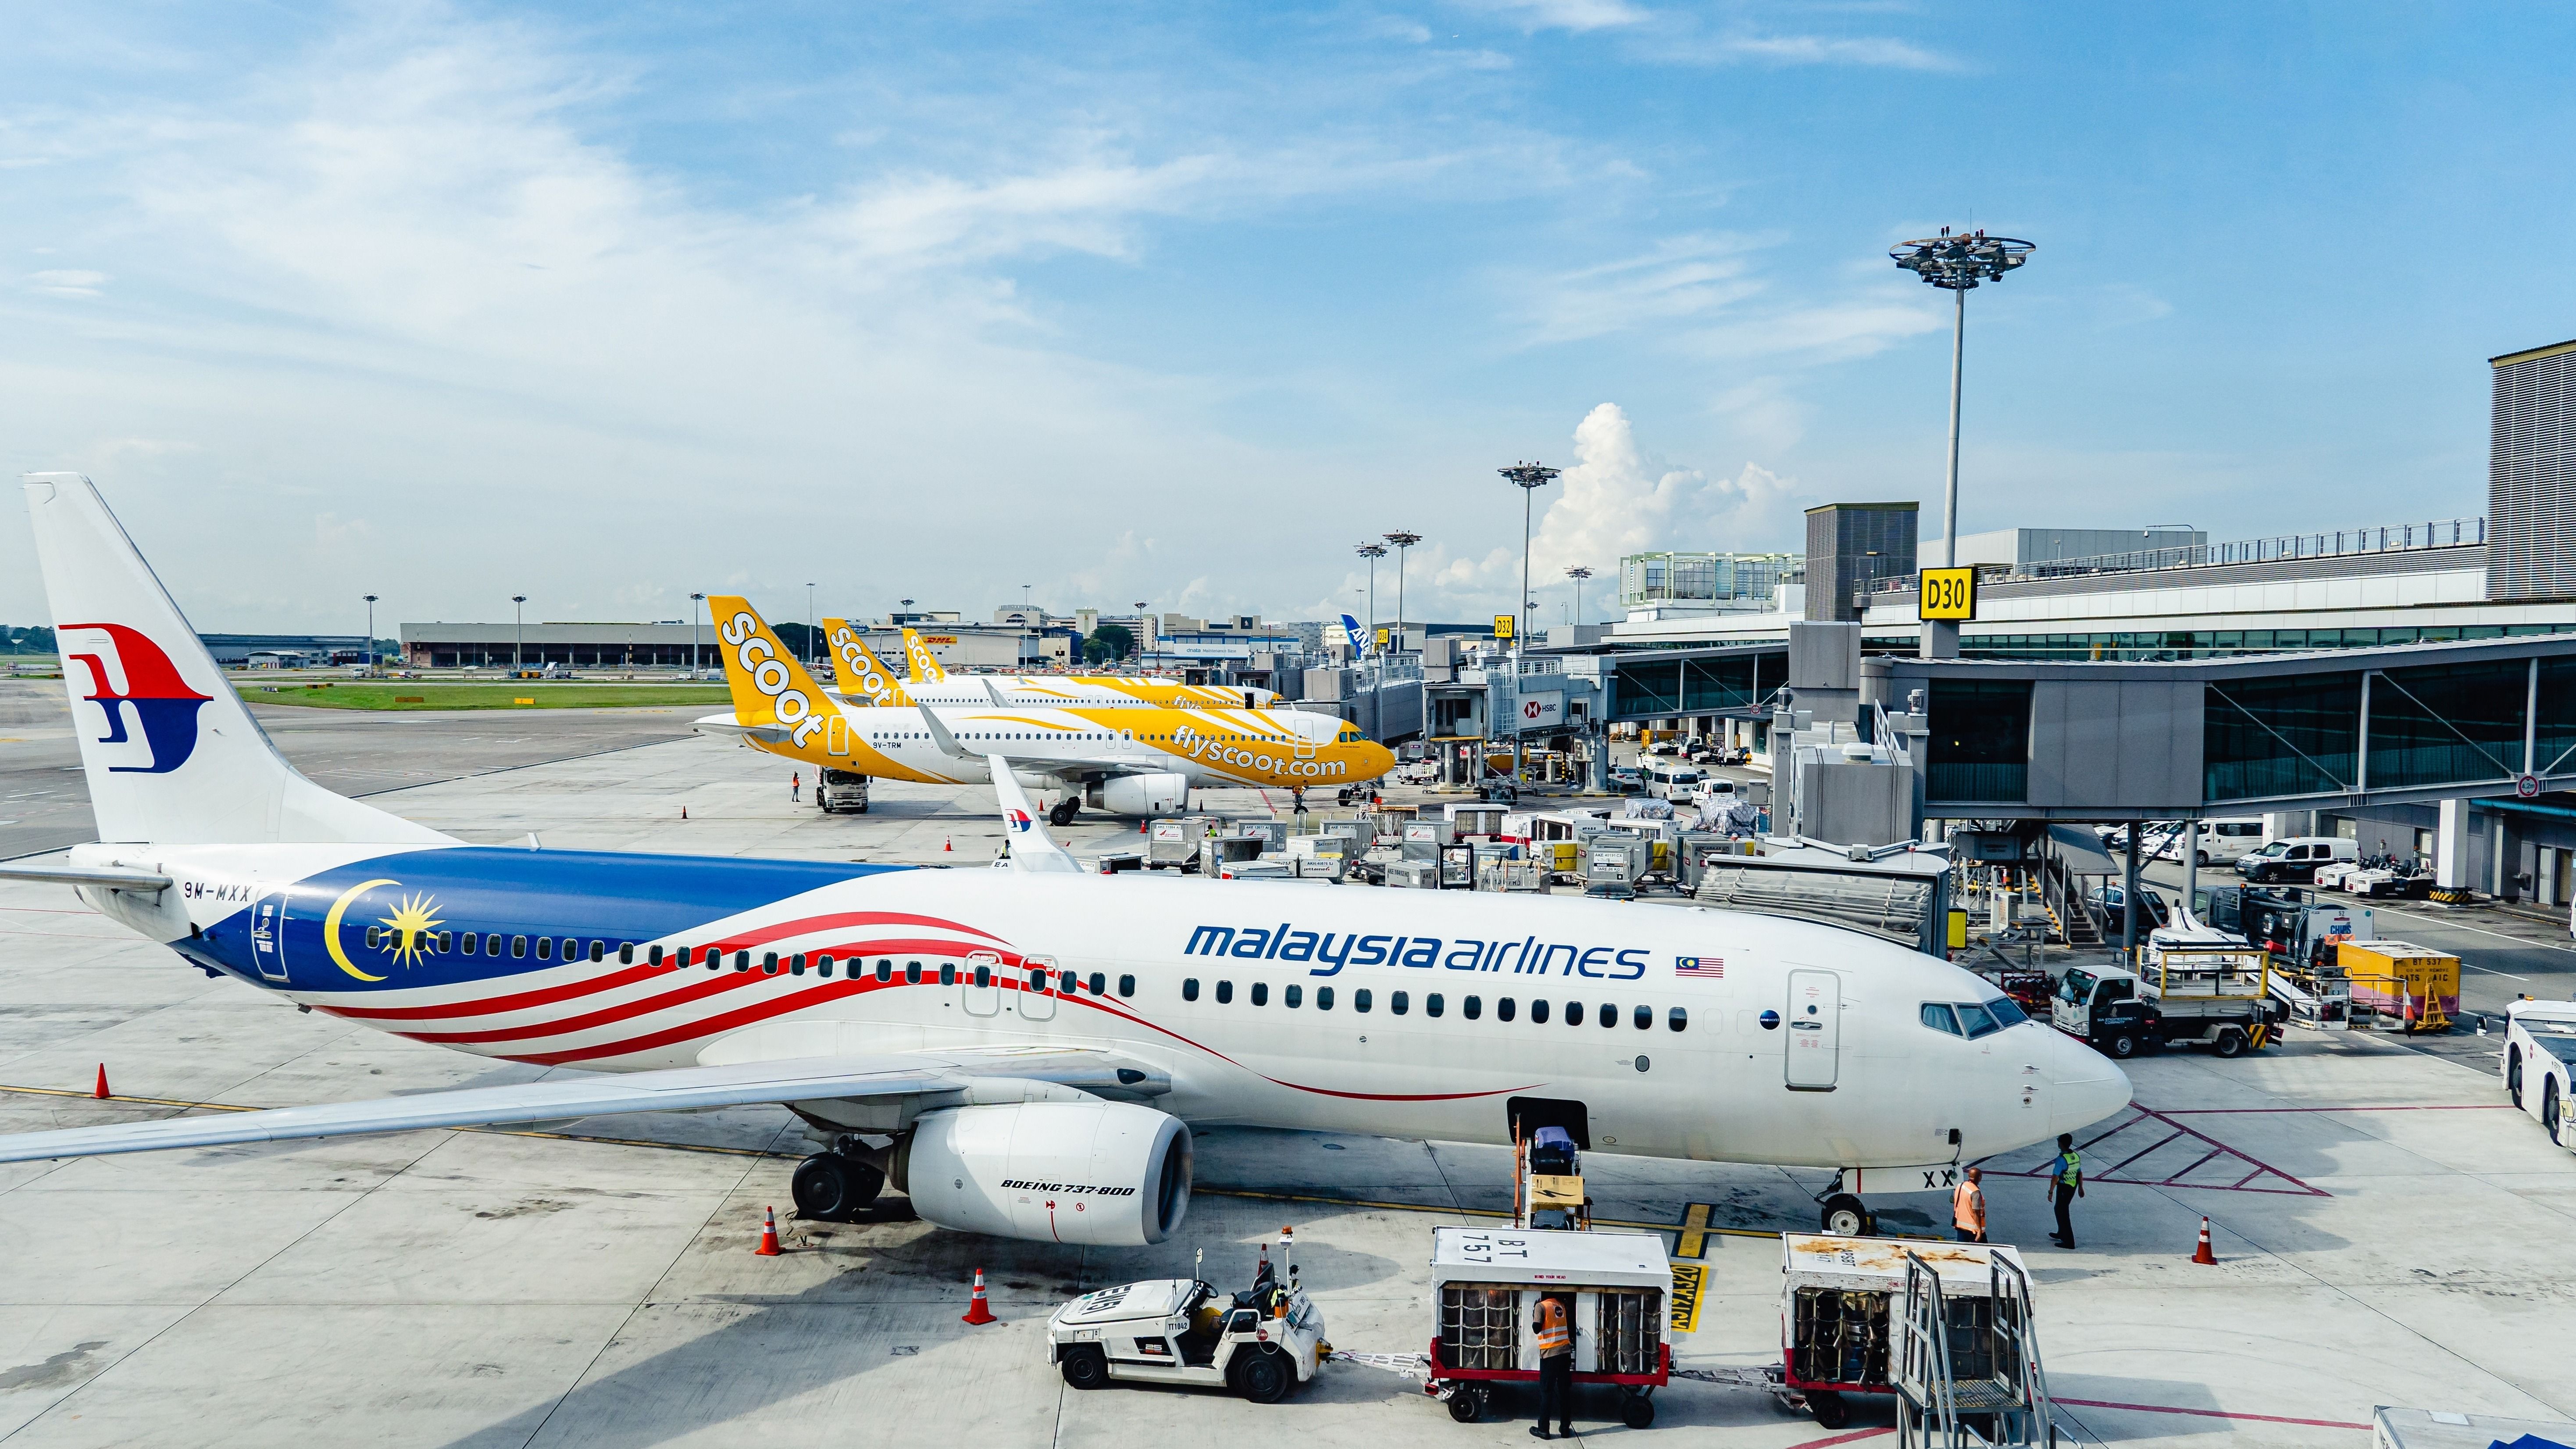 Malaysia Airlines and Scoot in Singapore